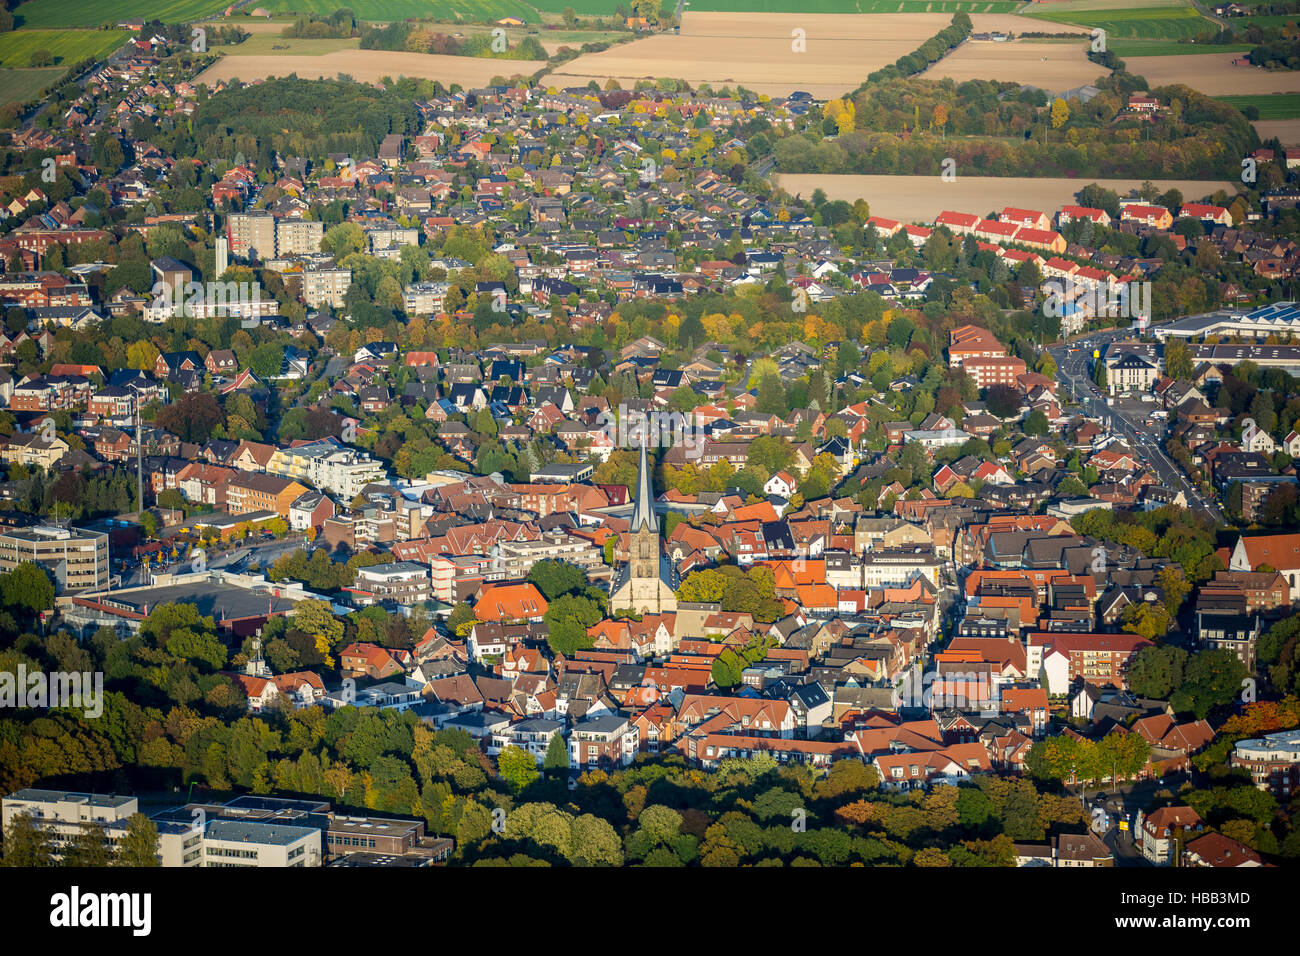 Aerial view, Old Town city center Werne, St. Christopher Church, Old Town Hall, Werne, Ruhr, north rhine-westphalia, Germany, Stock Photo